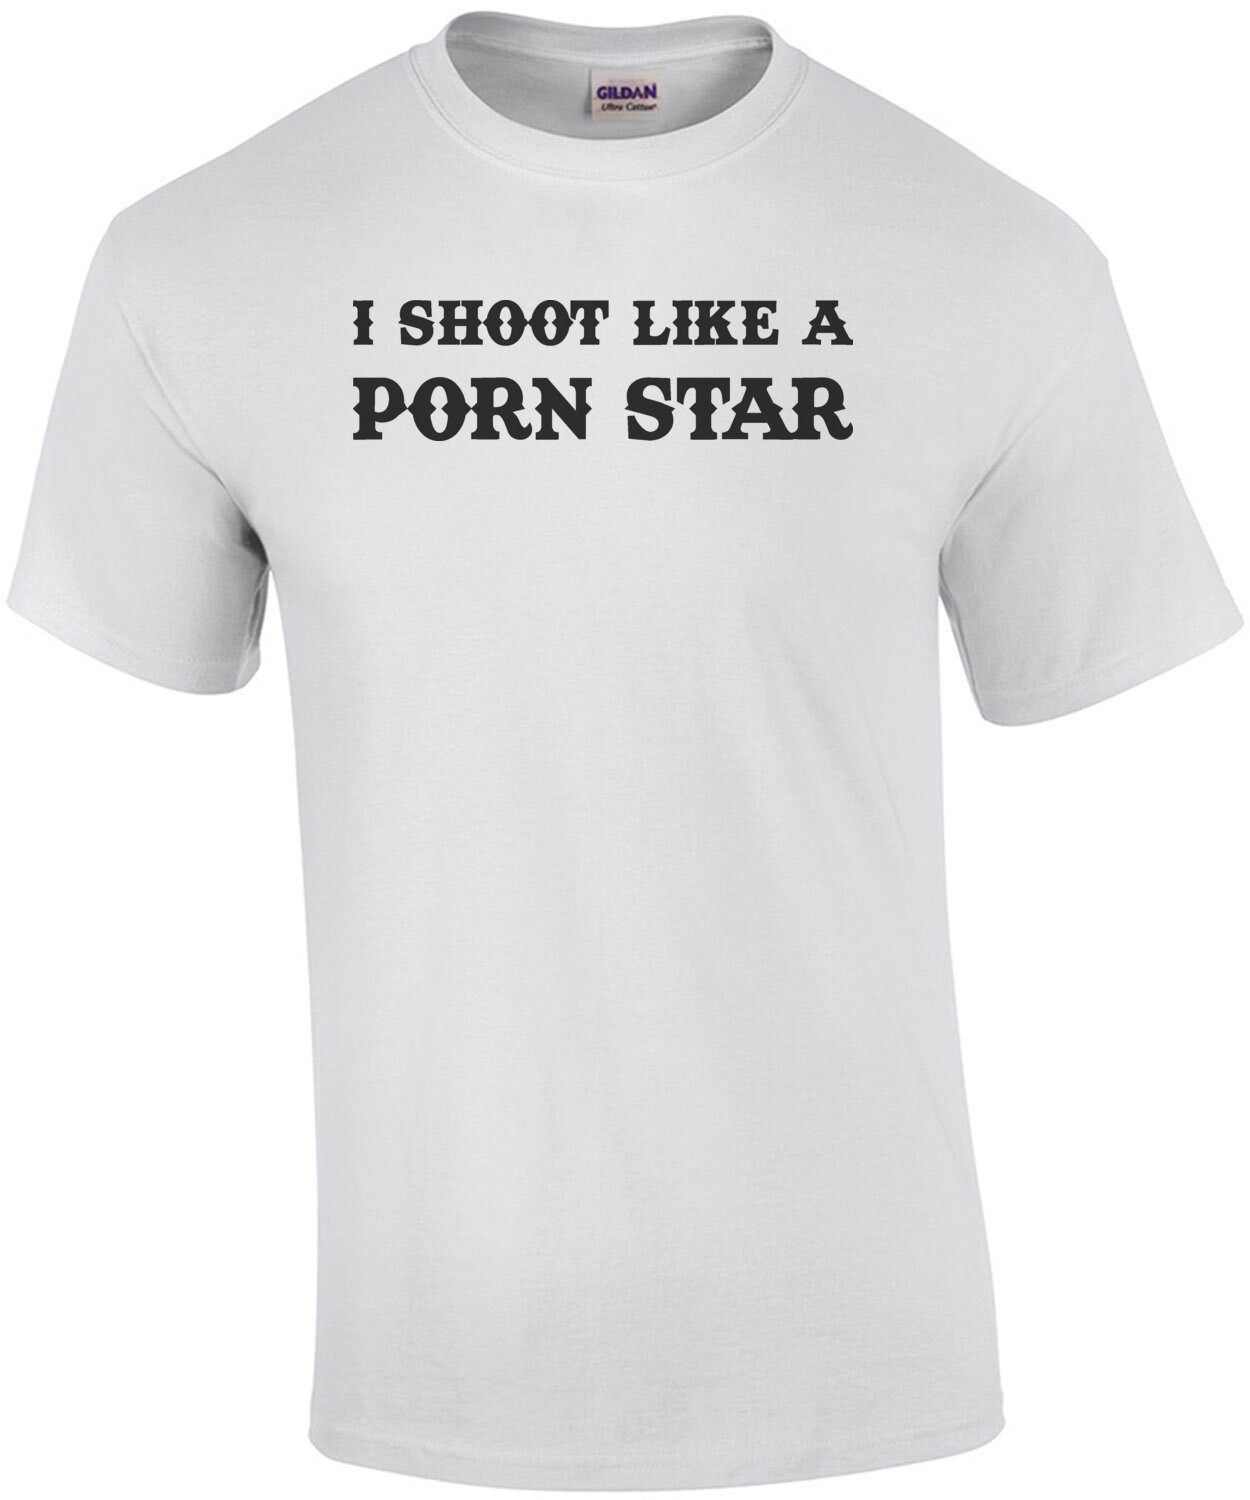 I shoot like a porn star - offensive sexual t-shirt